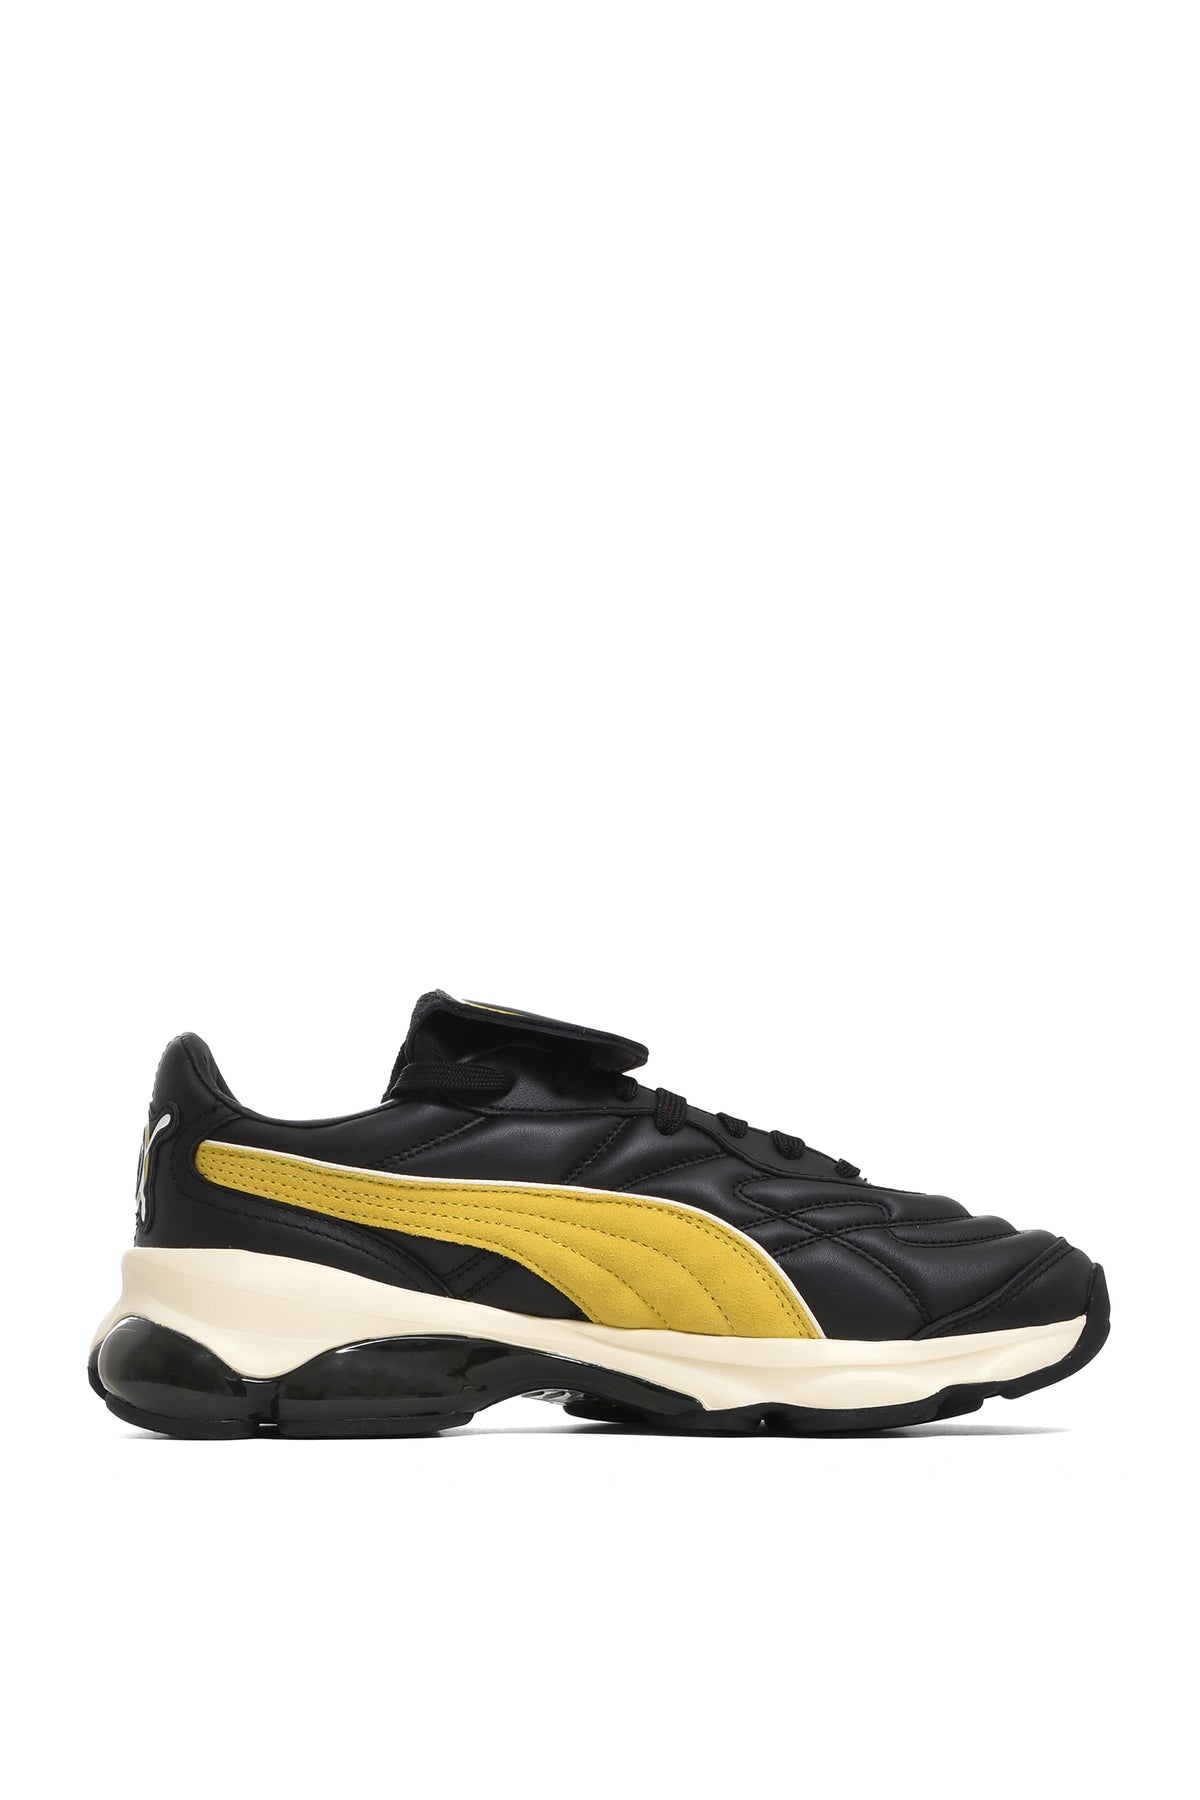 PUMA × P.A.M. P.A.M. CELL DOME KING / BLK